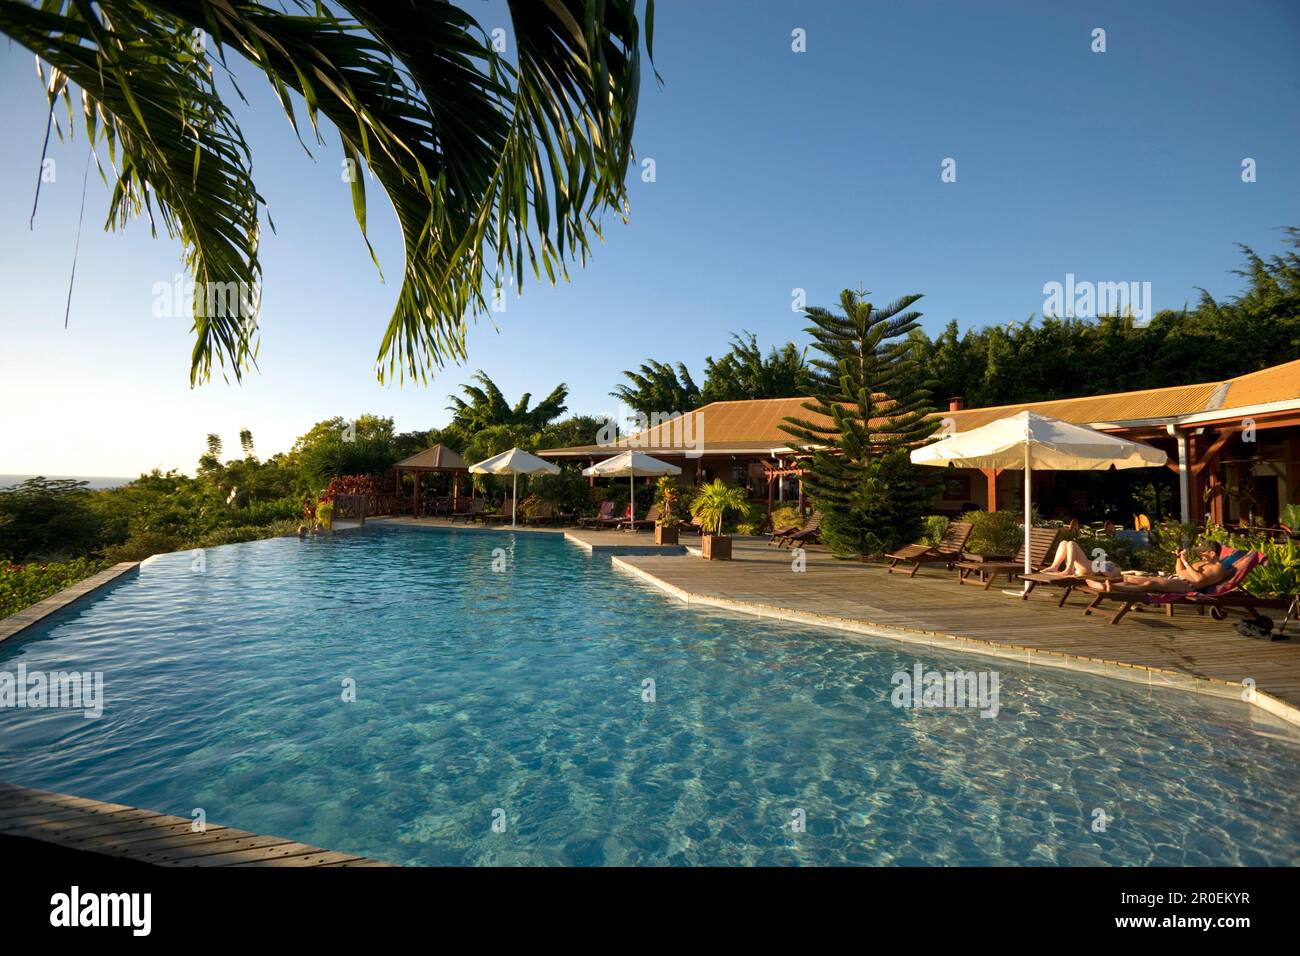 Pool of the Hotel Restaurant Le Rayon Vert in the sunlight, Deshaies, Caribbean, America Stock Photo